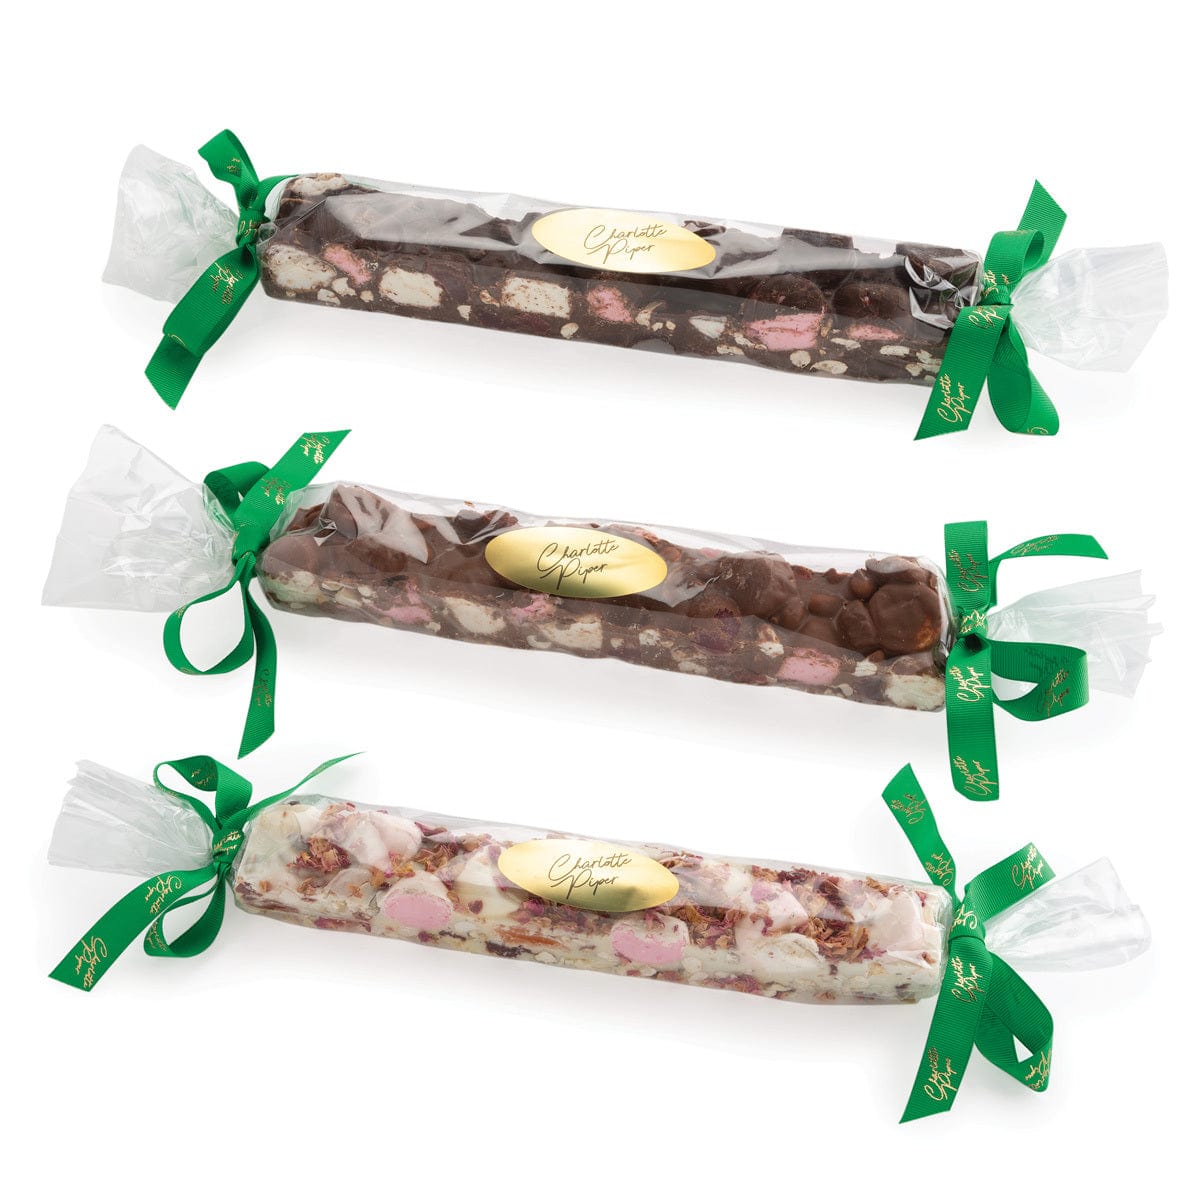 Large Charlotte Piper Rocky Road Bar with Ribbon 300g